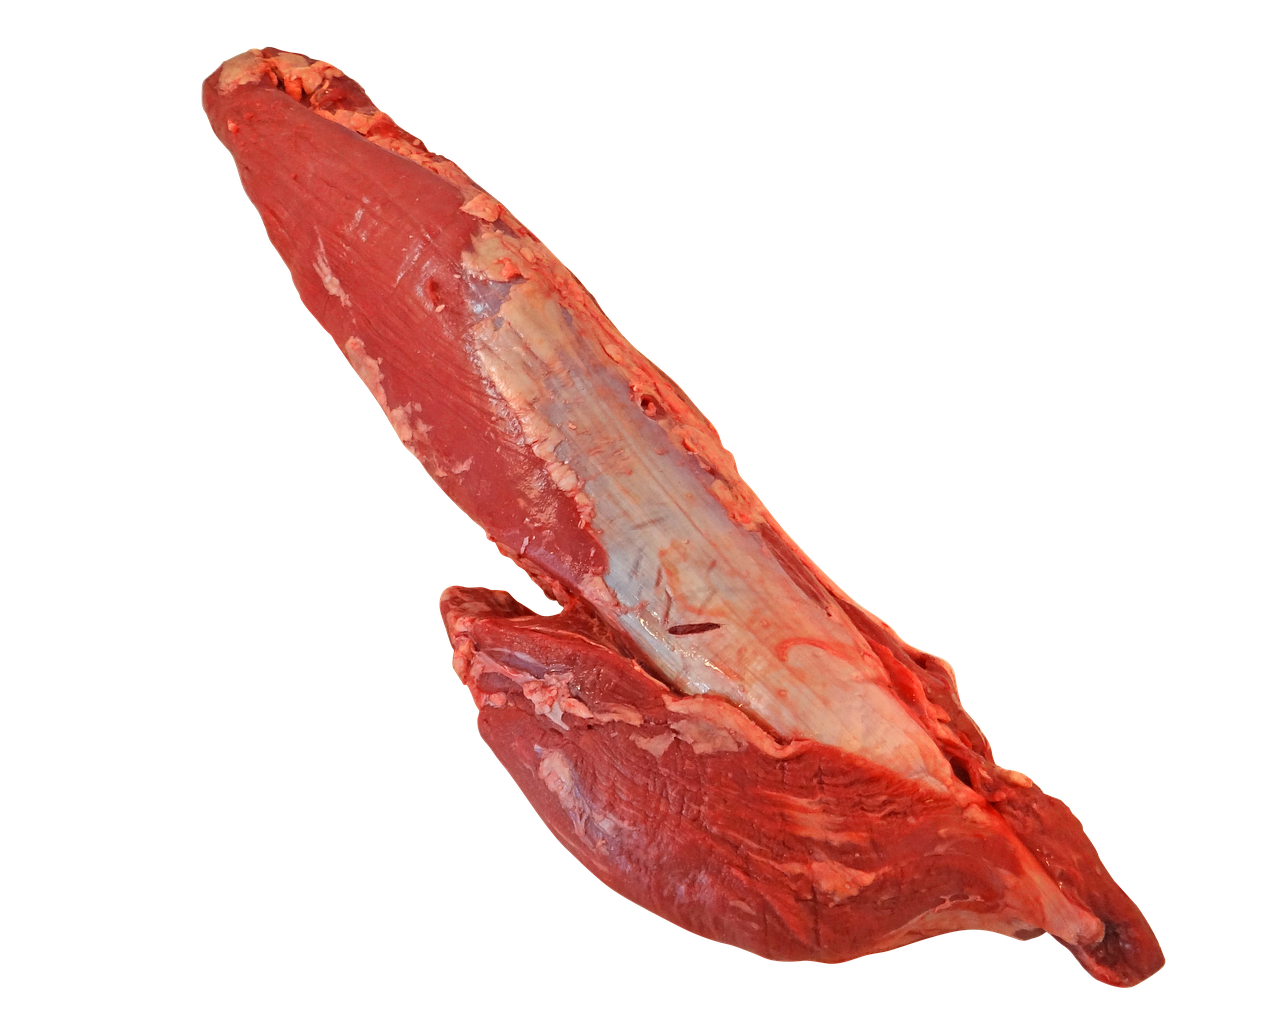 a piece of meat sitting on top of a piece of meat, by Thomas de Keyser, featured on zbrush central, underside of a fox paw, full - view, donkey ears, ca. 2001